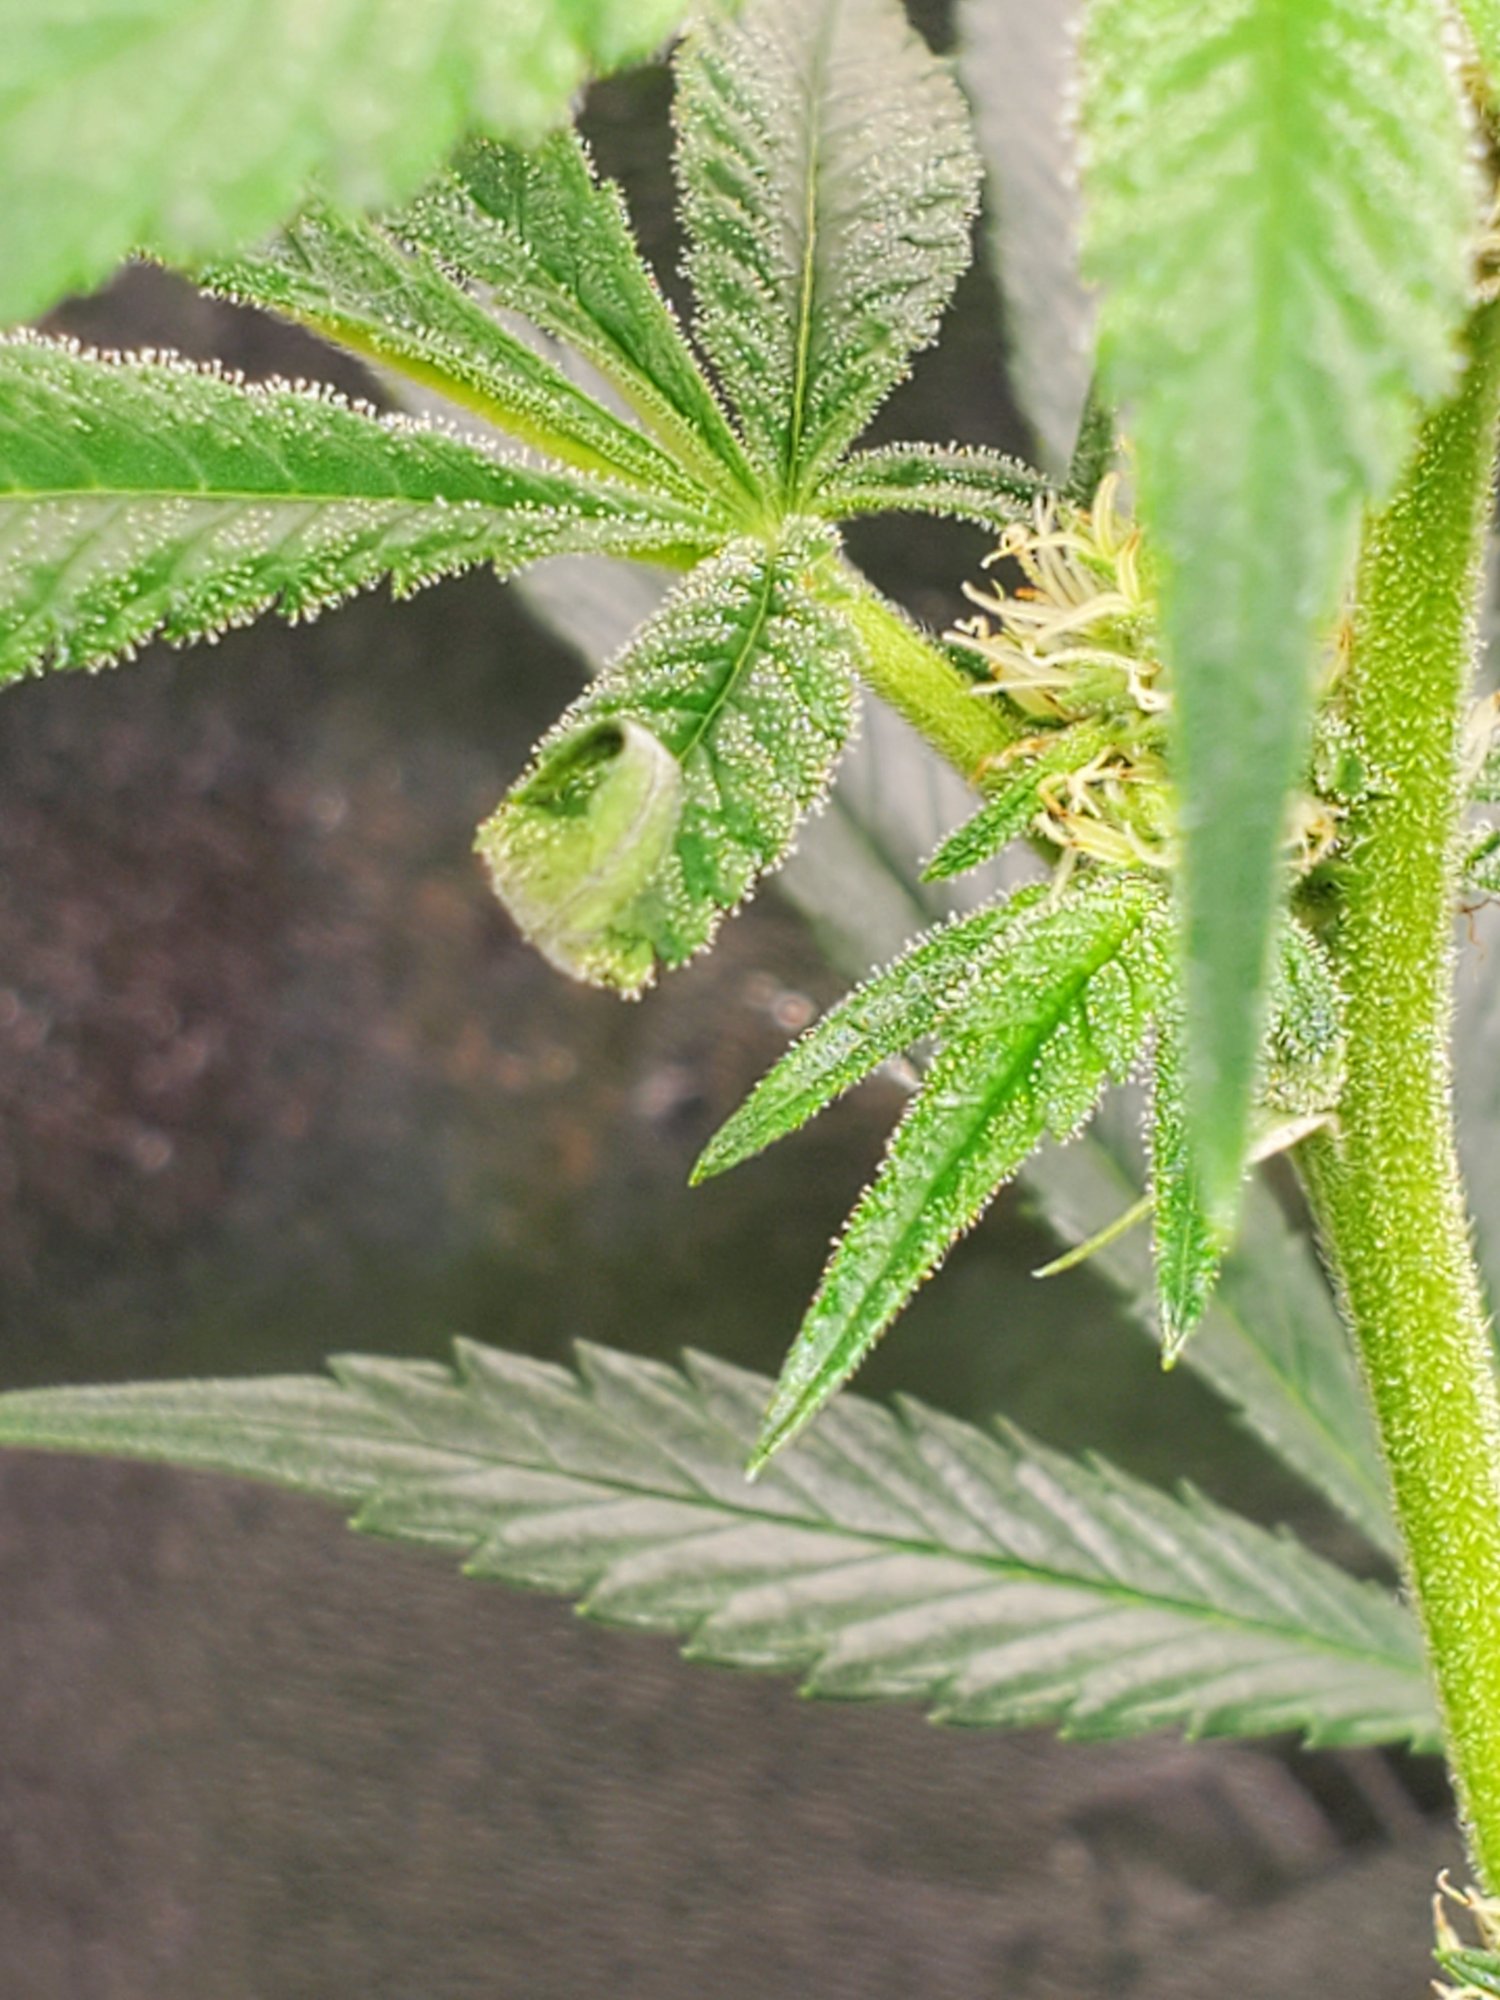 Thrips to black spots to leaf tips curling up in week 4 flower 4